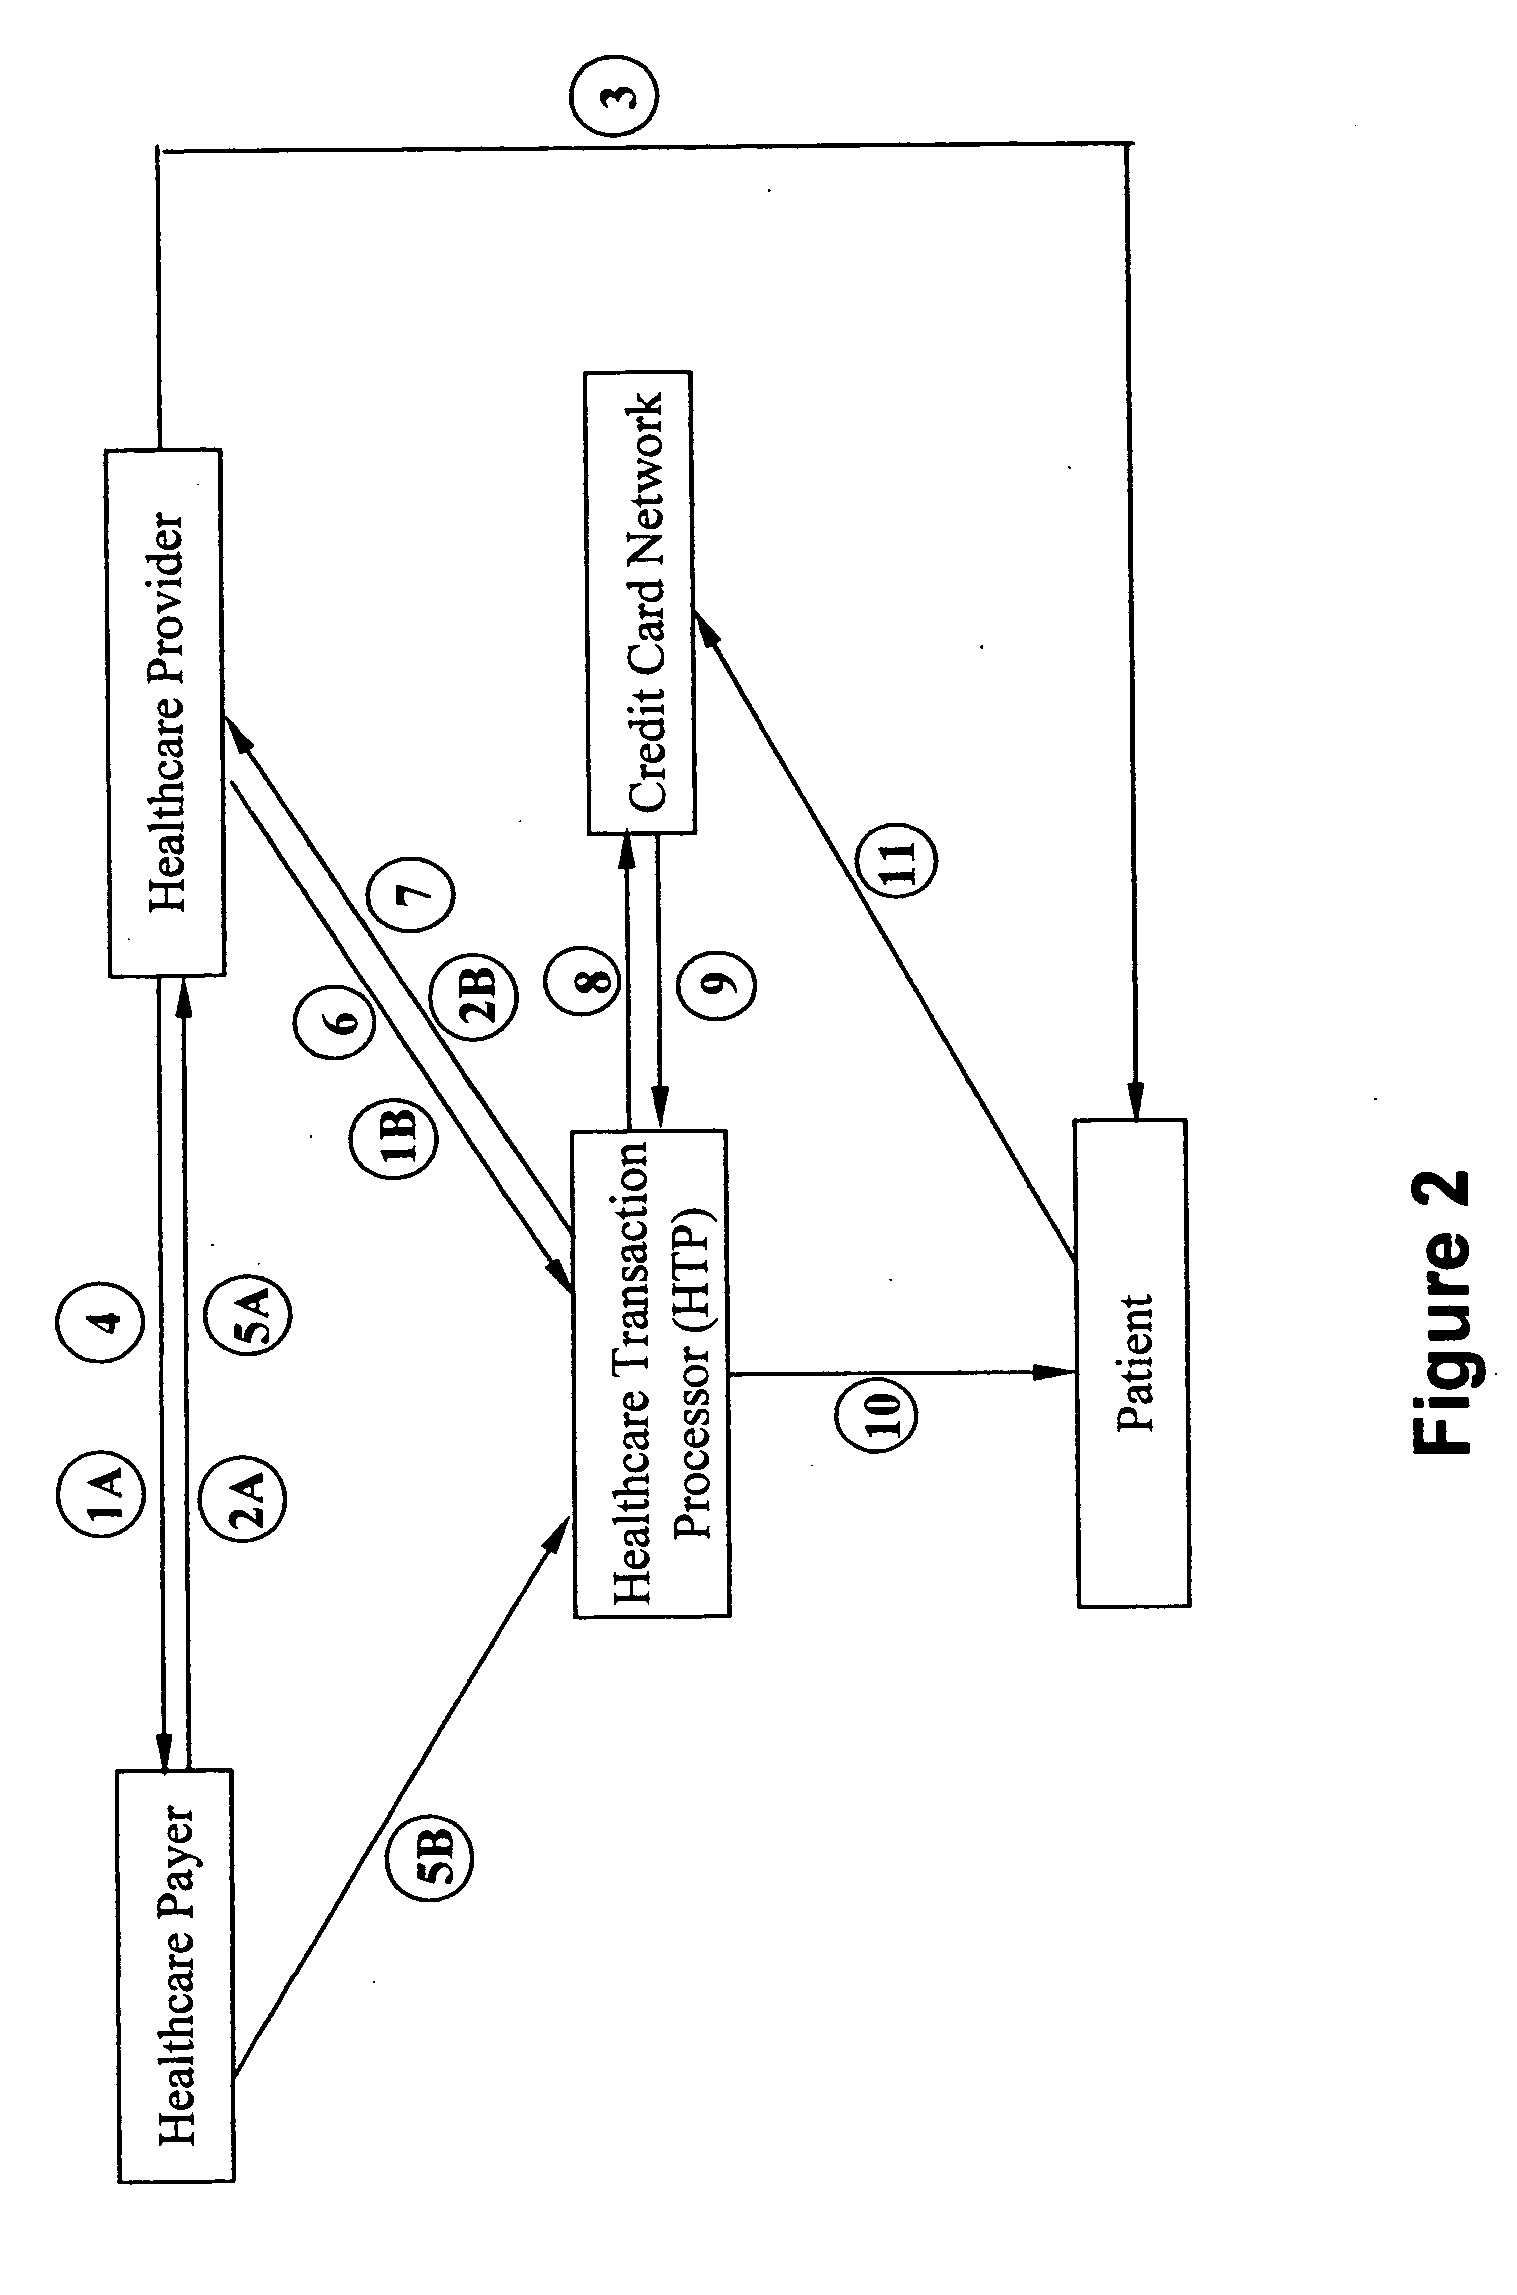 Healthcare system integrated with a healthcare transaction processor, and method for providing healthcare transaction processing services